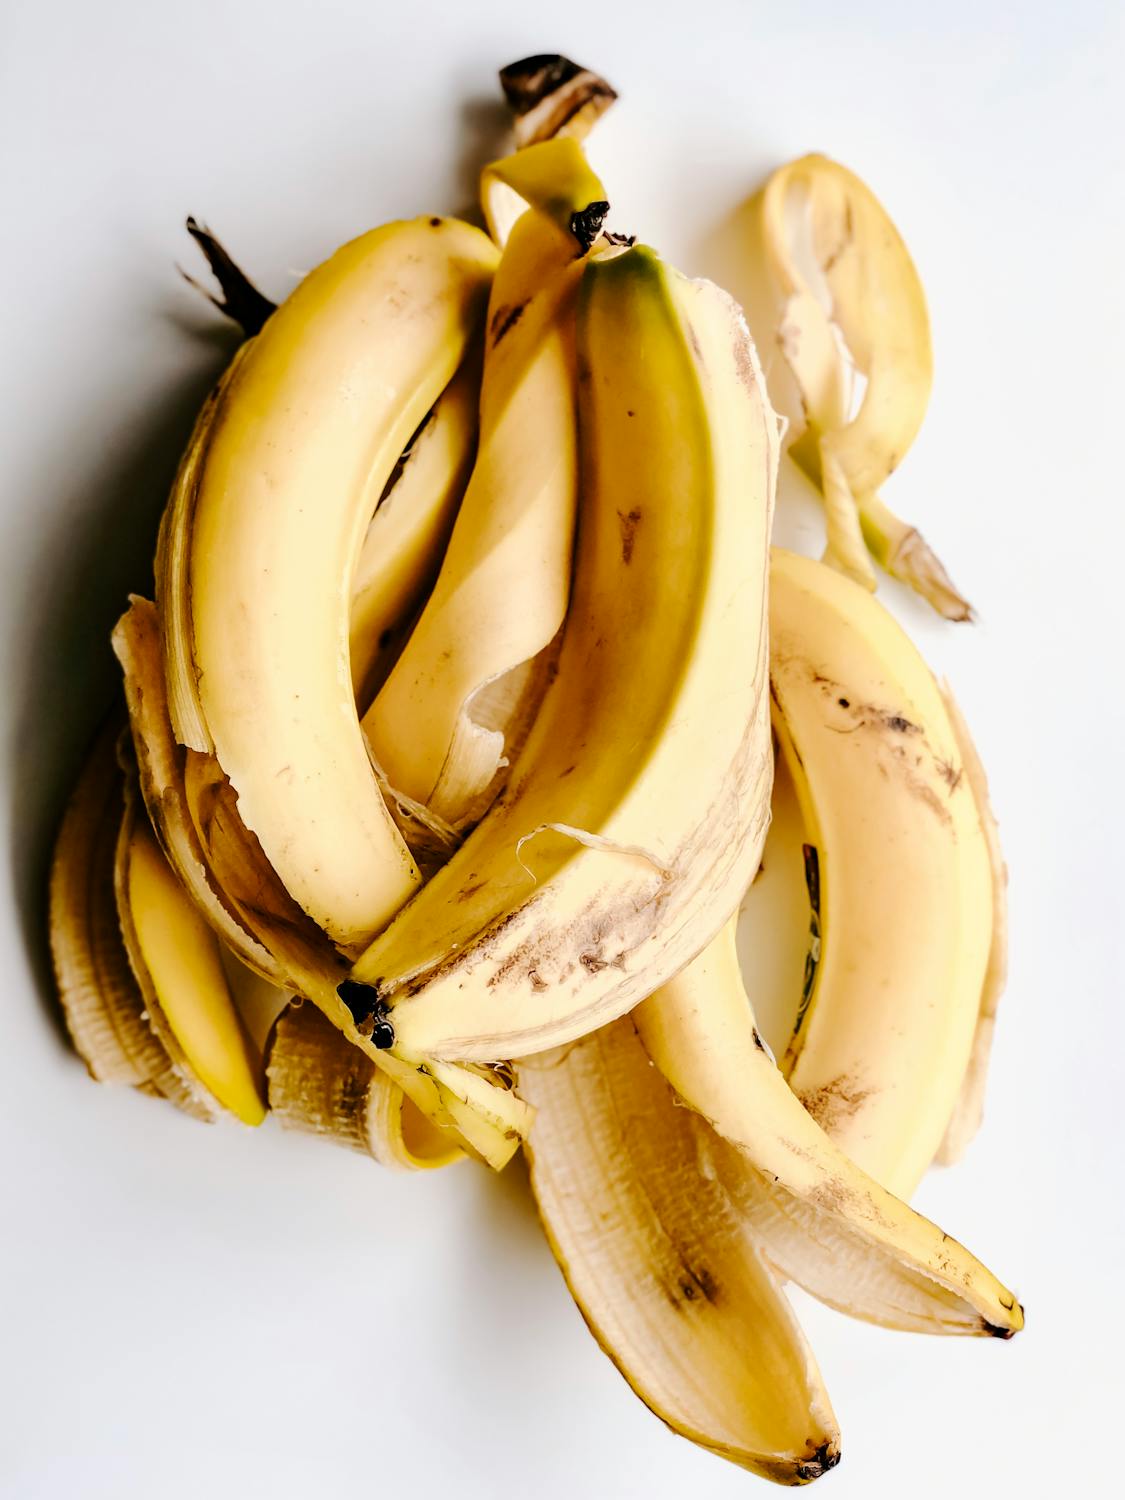 How To Make Money Selling Bananas